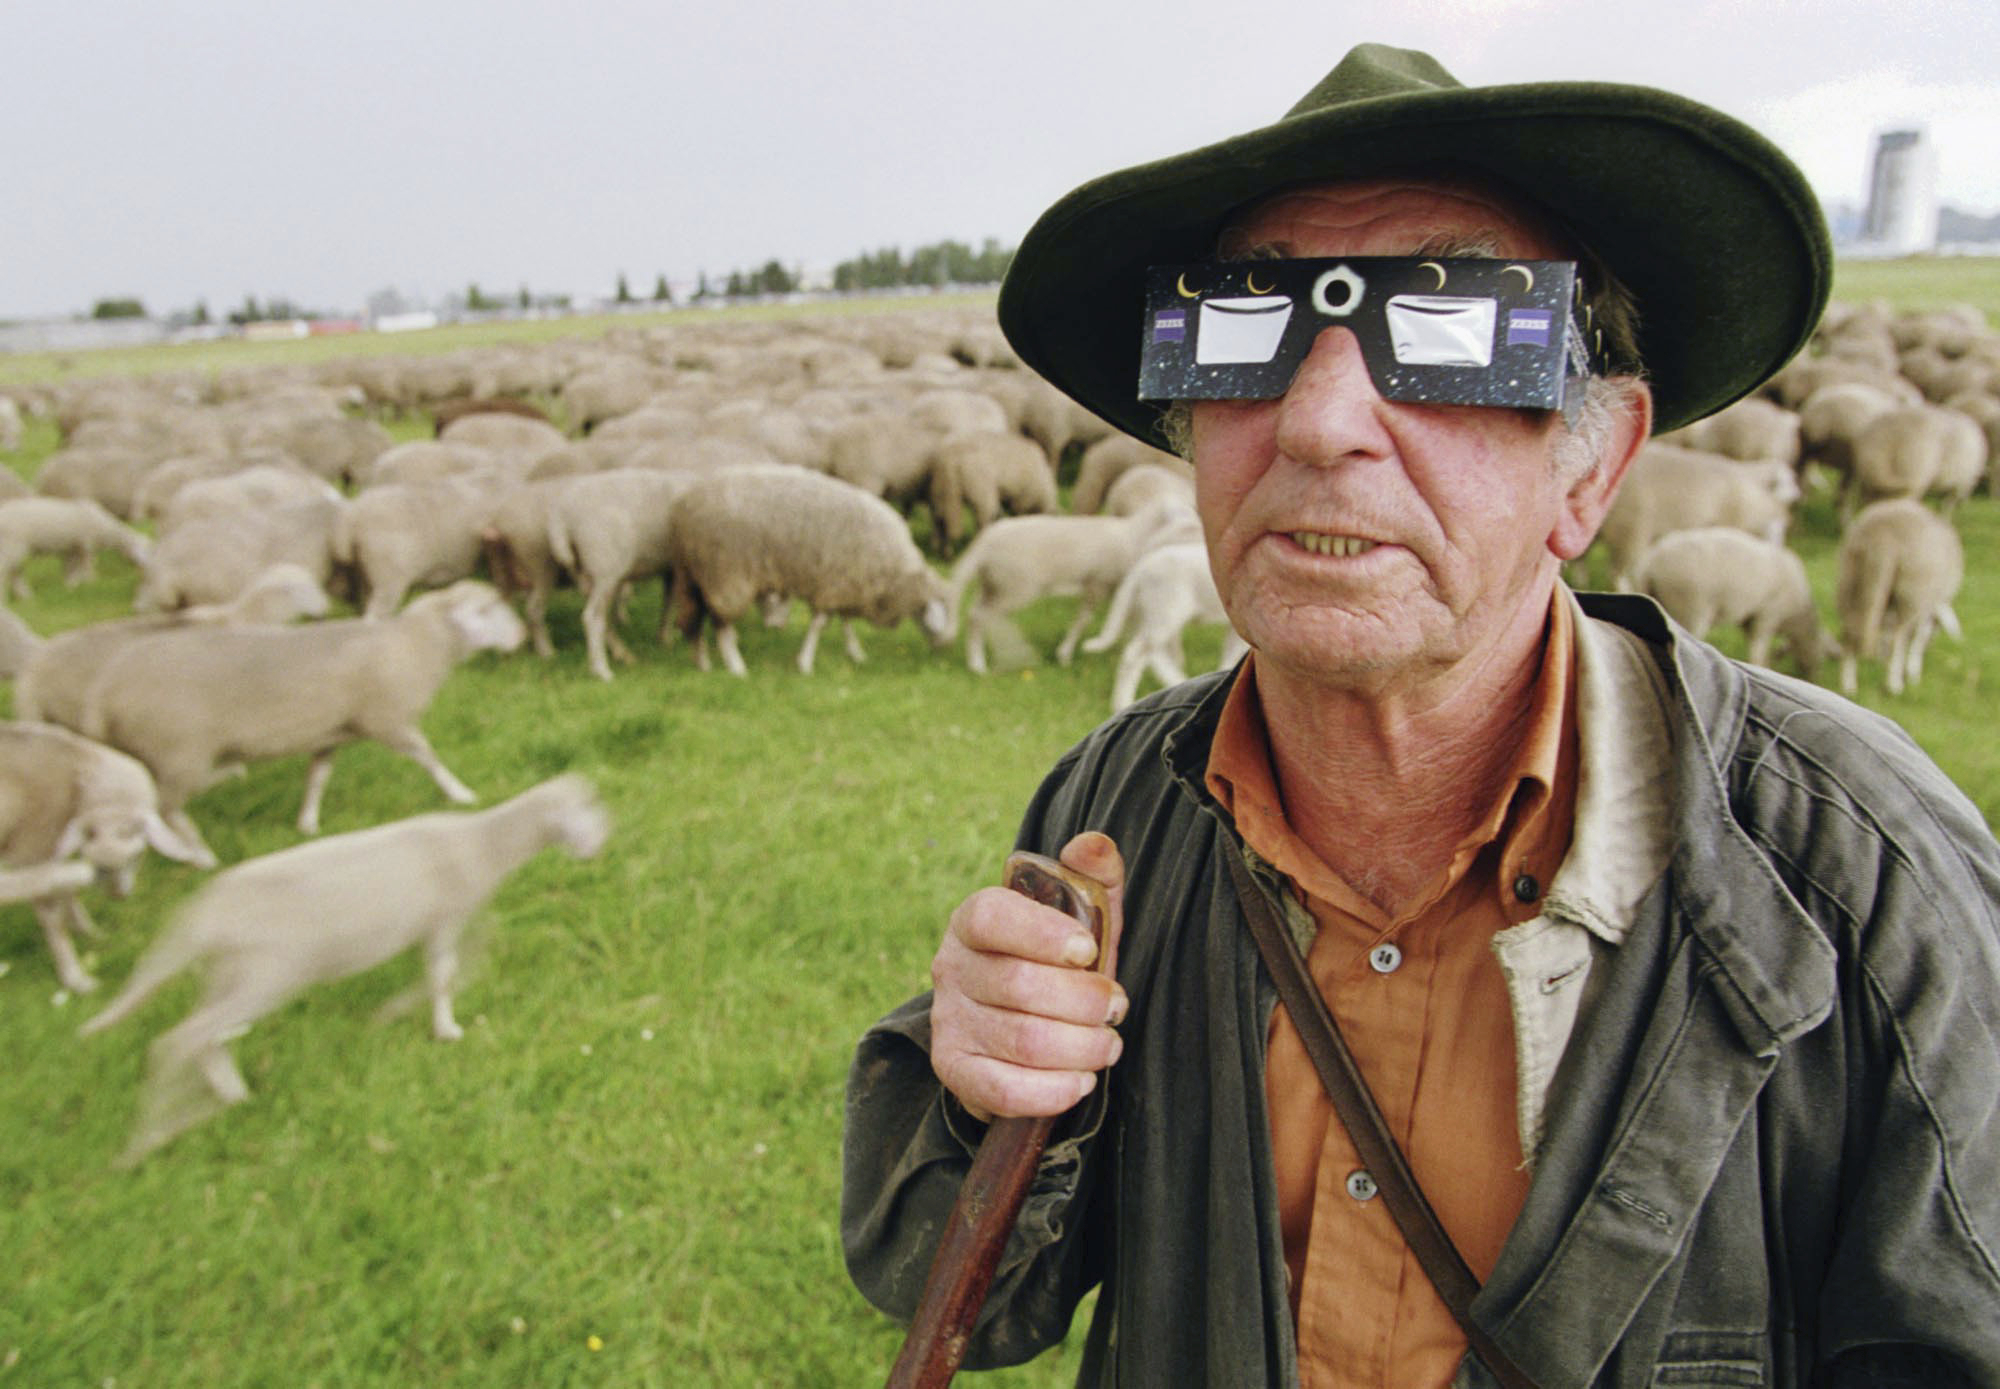 Shepherd Heinz Greiner watches the beginning of a total solar eclipse near Augsburg, southern Germany, on Wednesday, Aug. 11, 1999. (AP Photo/Frank Boxler, File)